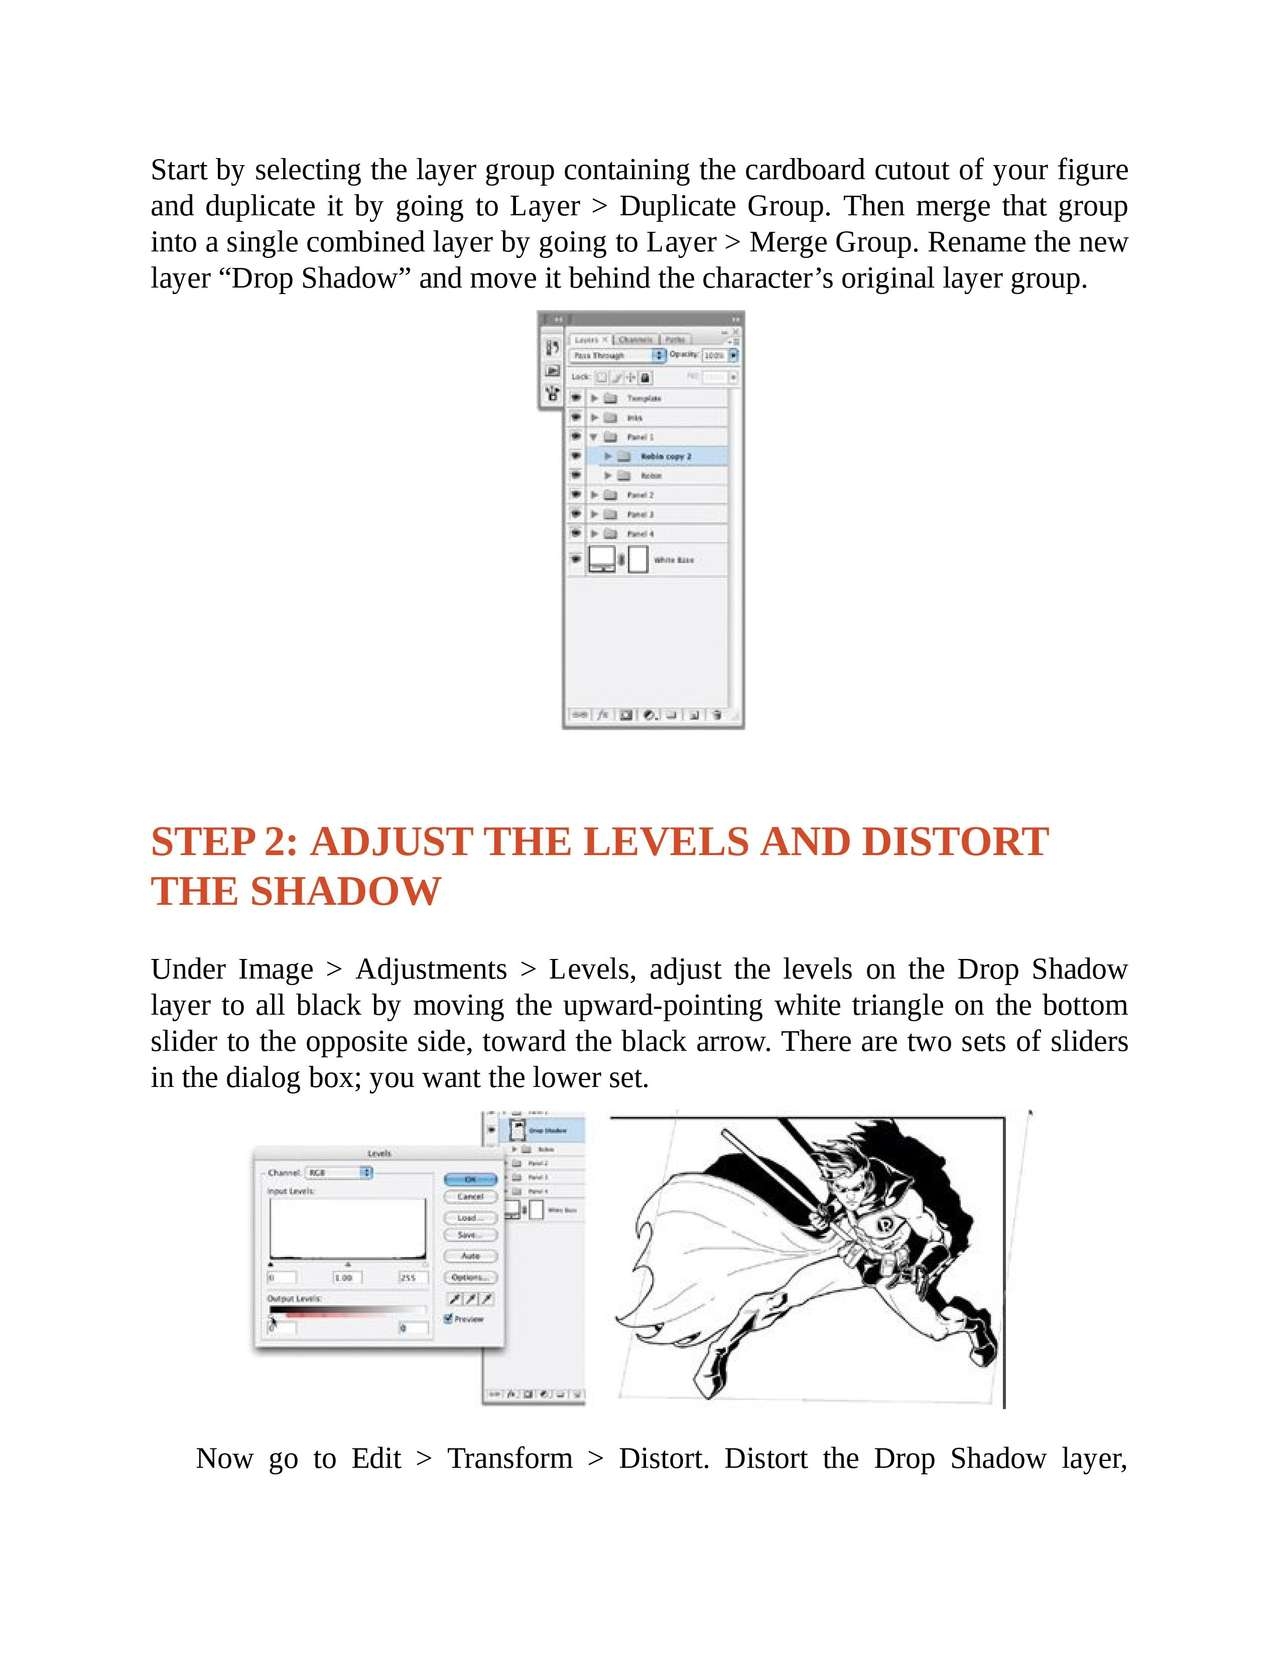 The DC Comics Guide to Digitally Drawing Comics 239